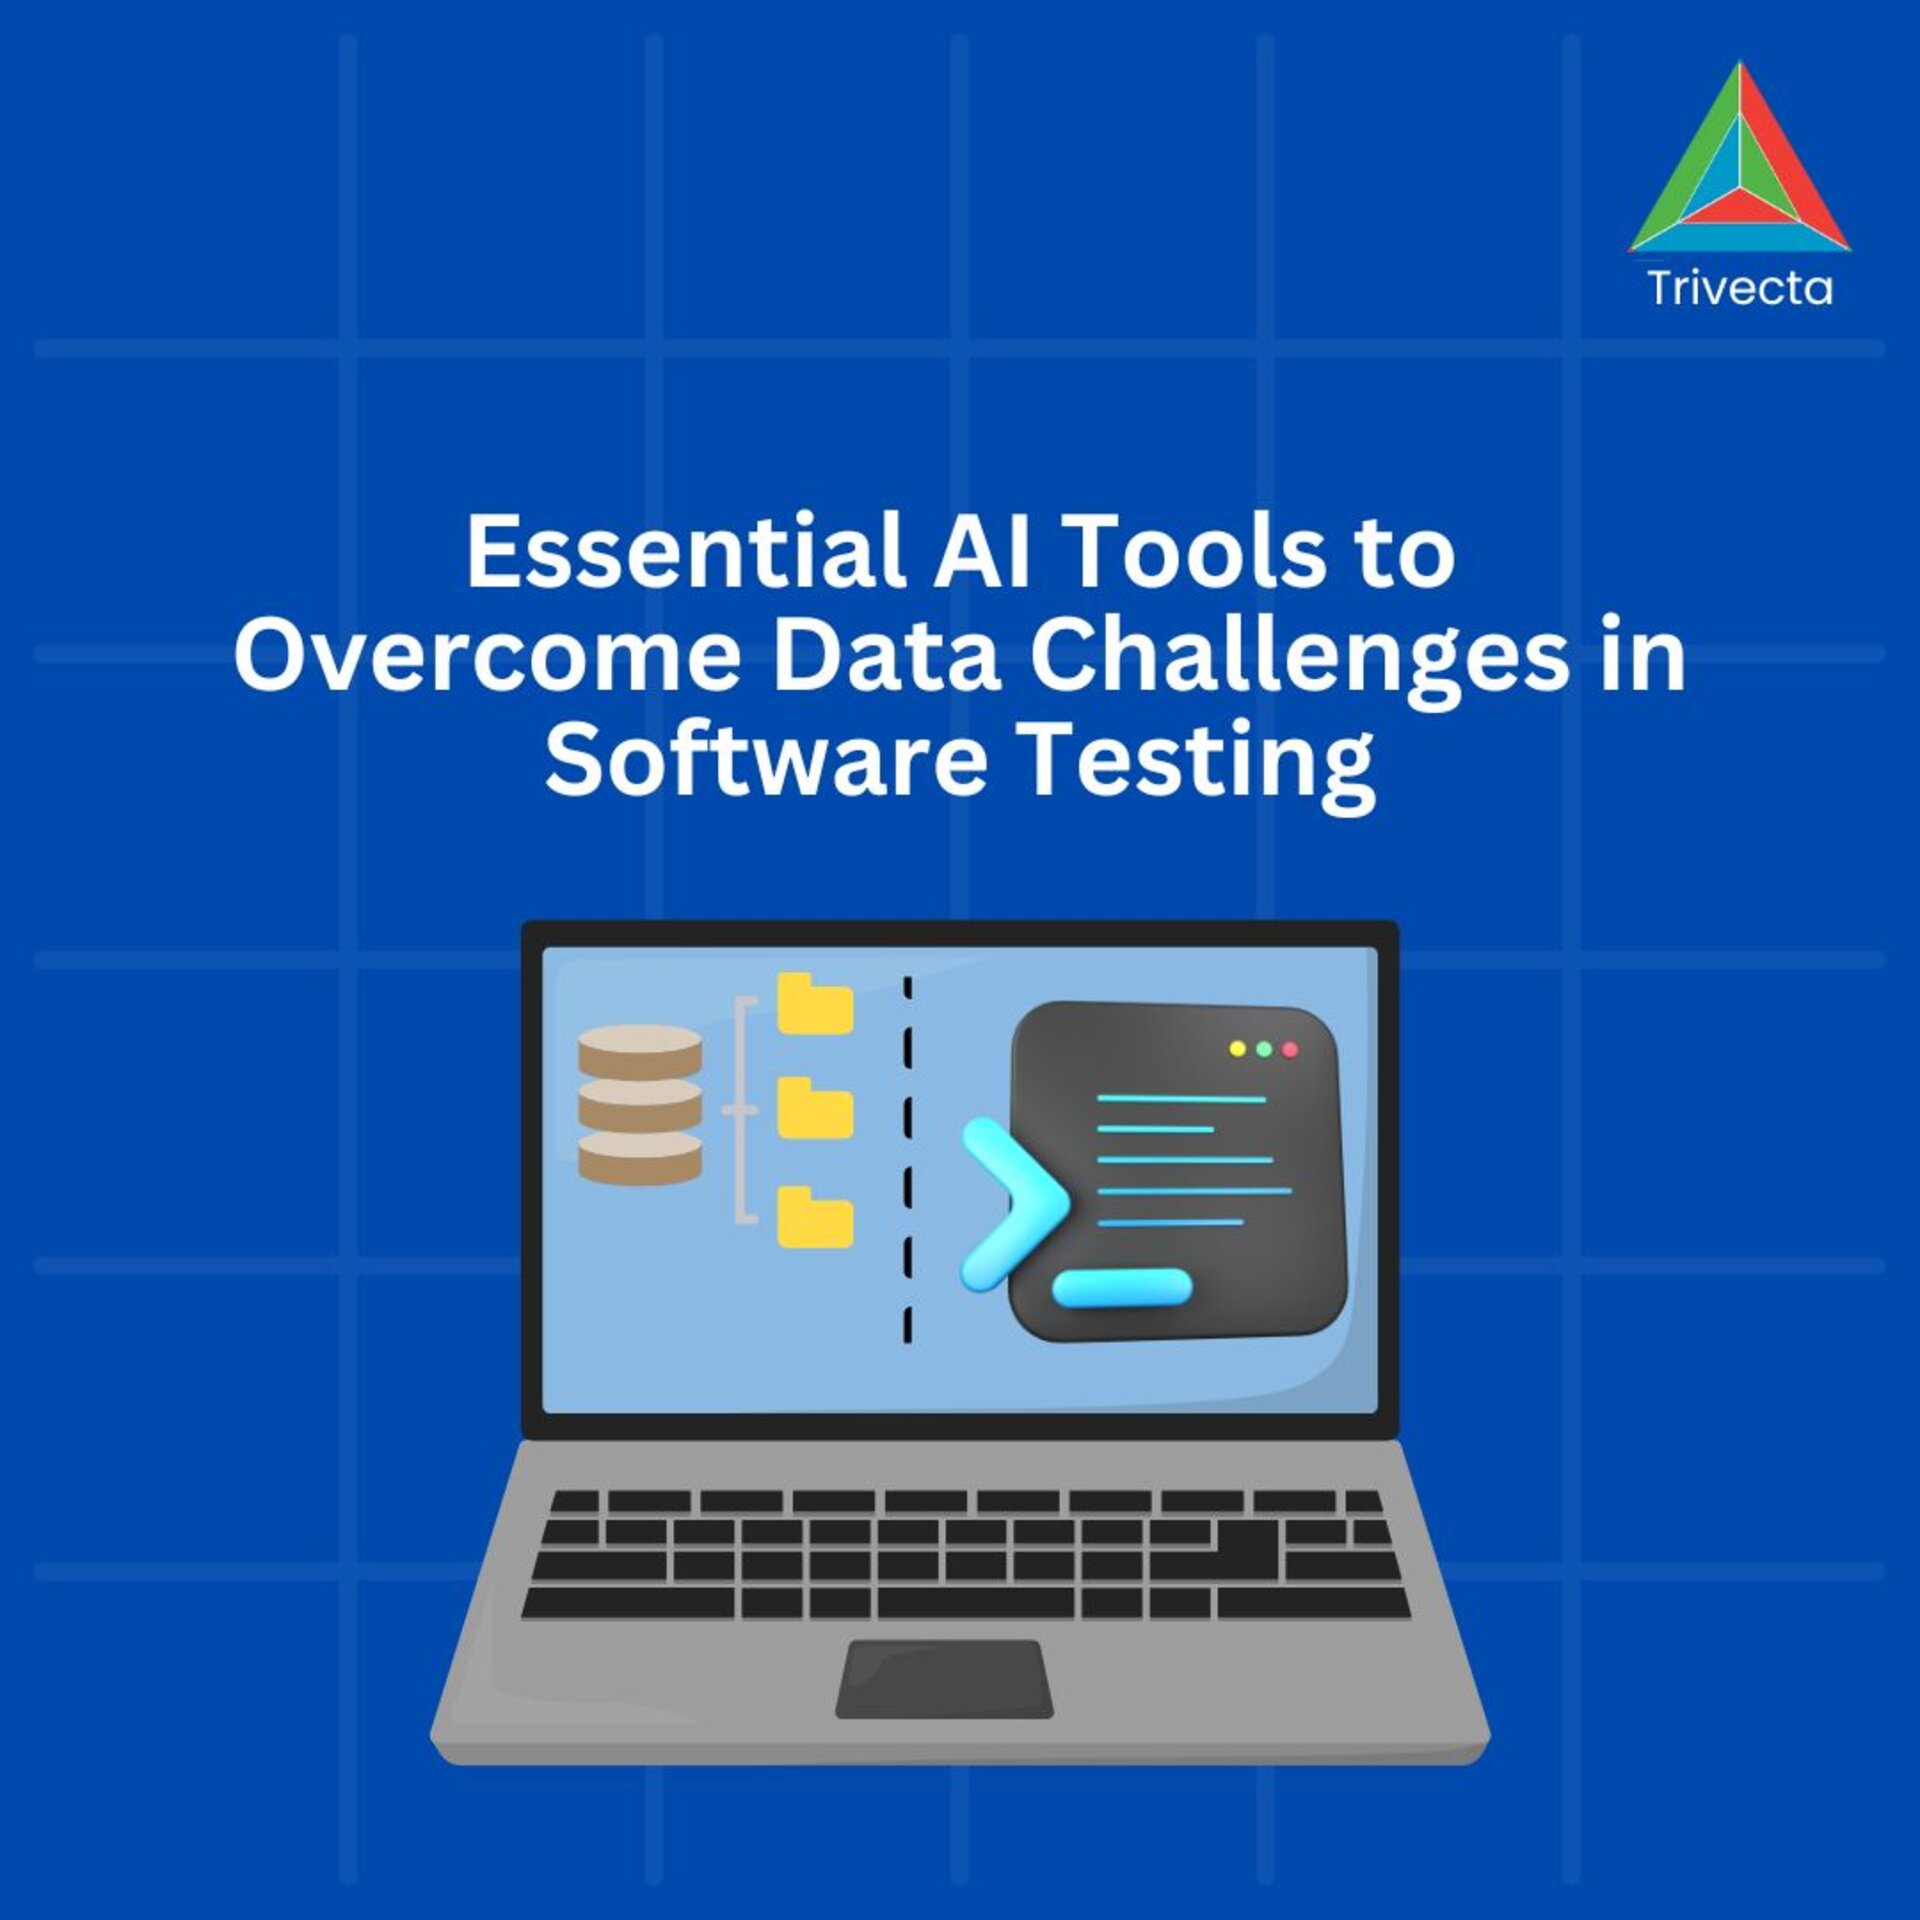 Essential AI Tools to Overcome Data Challenges in Software Testing